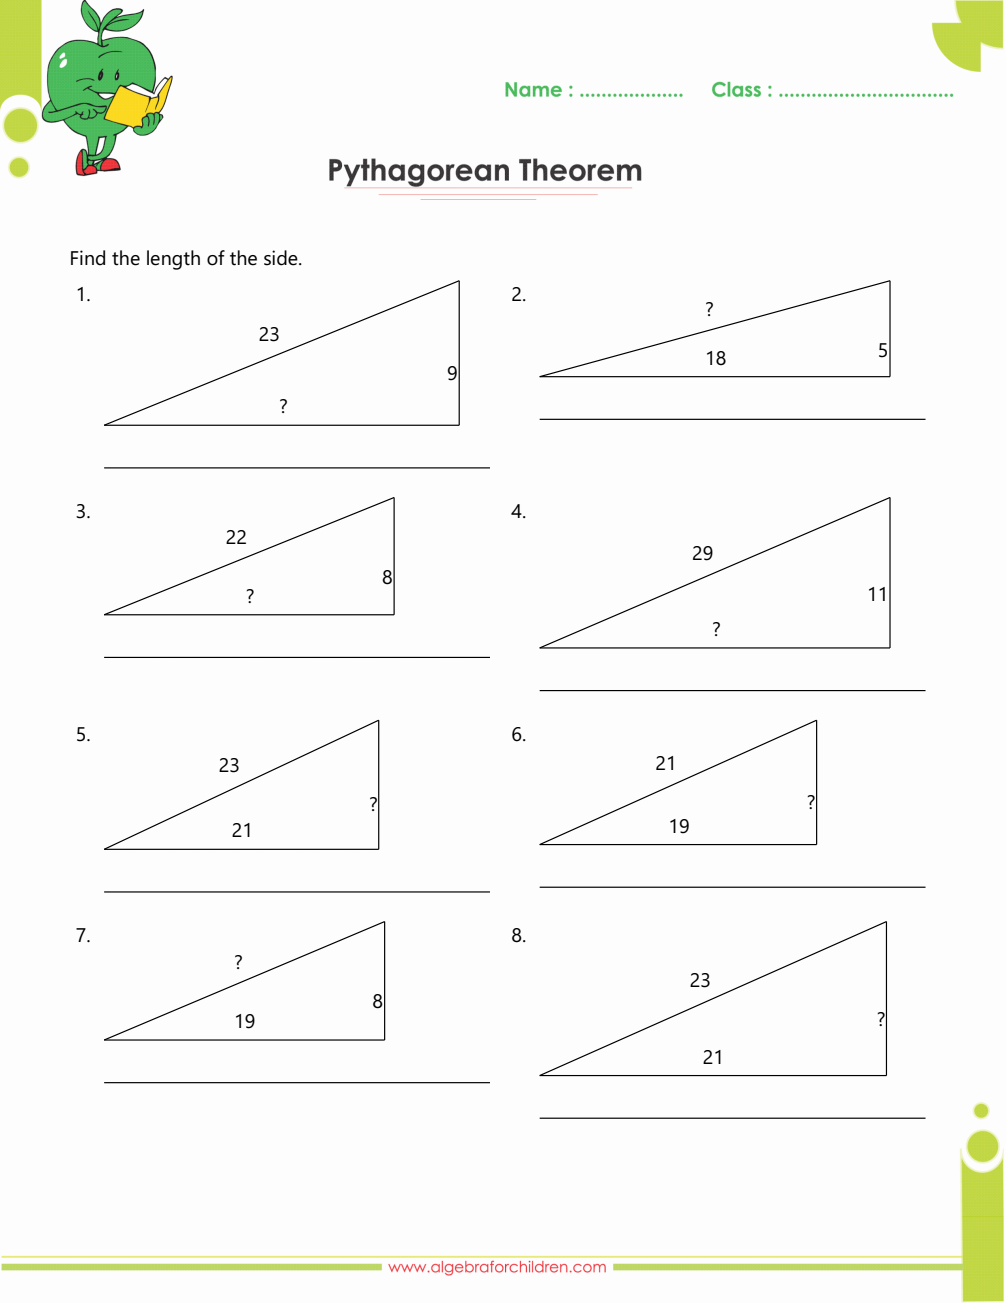 right triangle trigonometry worksheet with answers, right triangle trigonometry word problems worksheet, right triangle trigonometry worksheet answer key, right triangle trigonometry word problems worksheet with answers, right triangle trigonometry worksheet doc, practice worksheet right triangle trigonometry answers, trig word problems worksheet with answers, solving right triangles word problems worksheet with answers